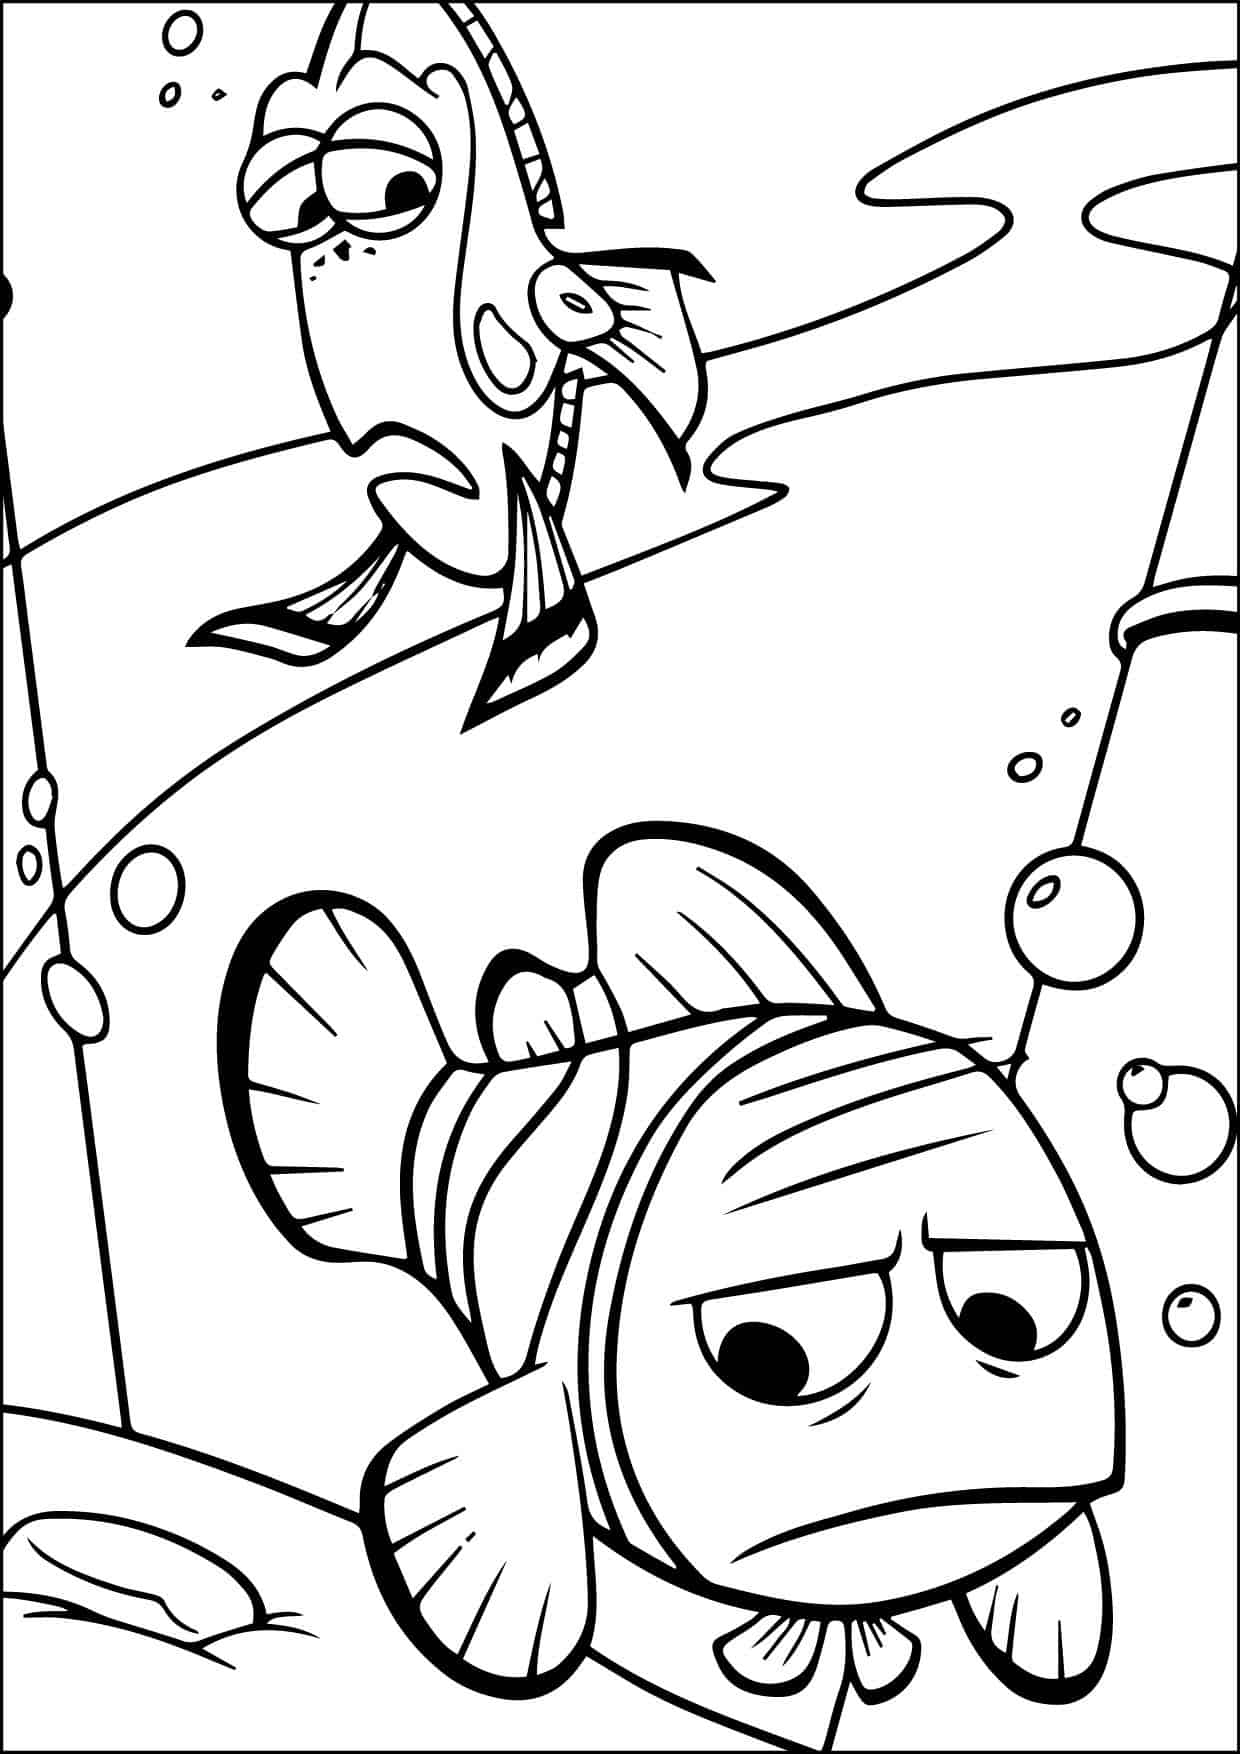 Finding Nemo Coloring Pages To Print